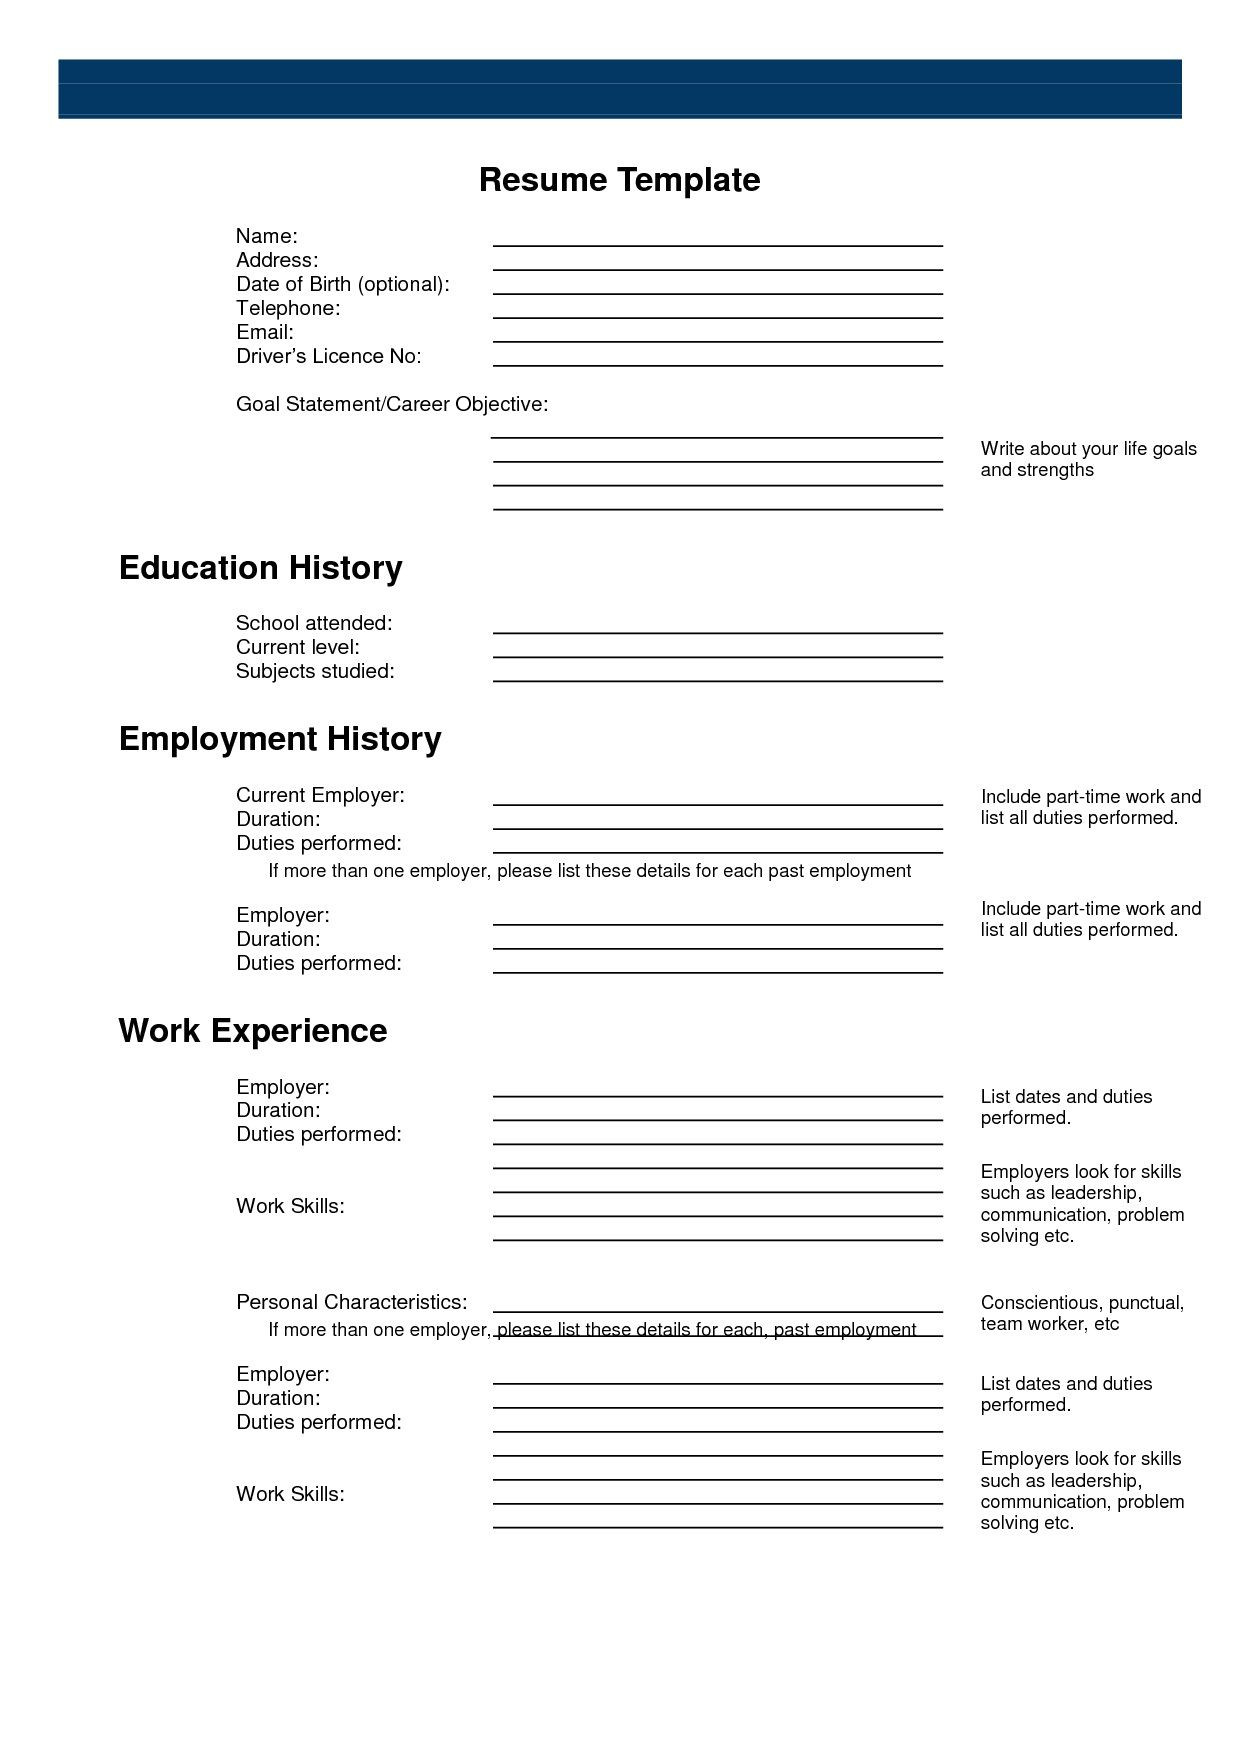 Resume Templates to Fill In the Blanks Free Printable Resume Templates Blank Builder Print Sample Free …